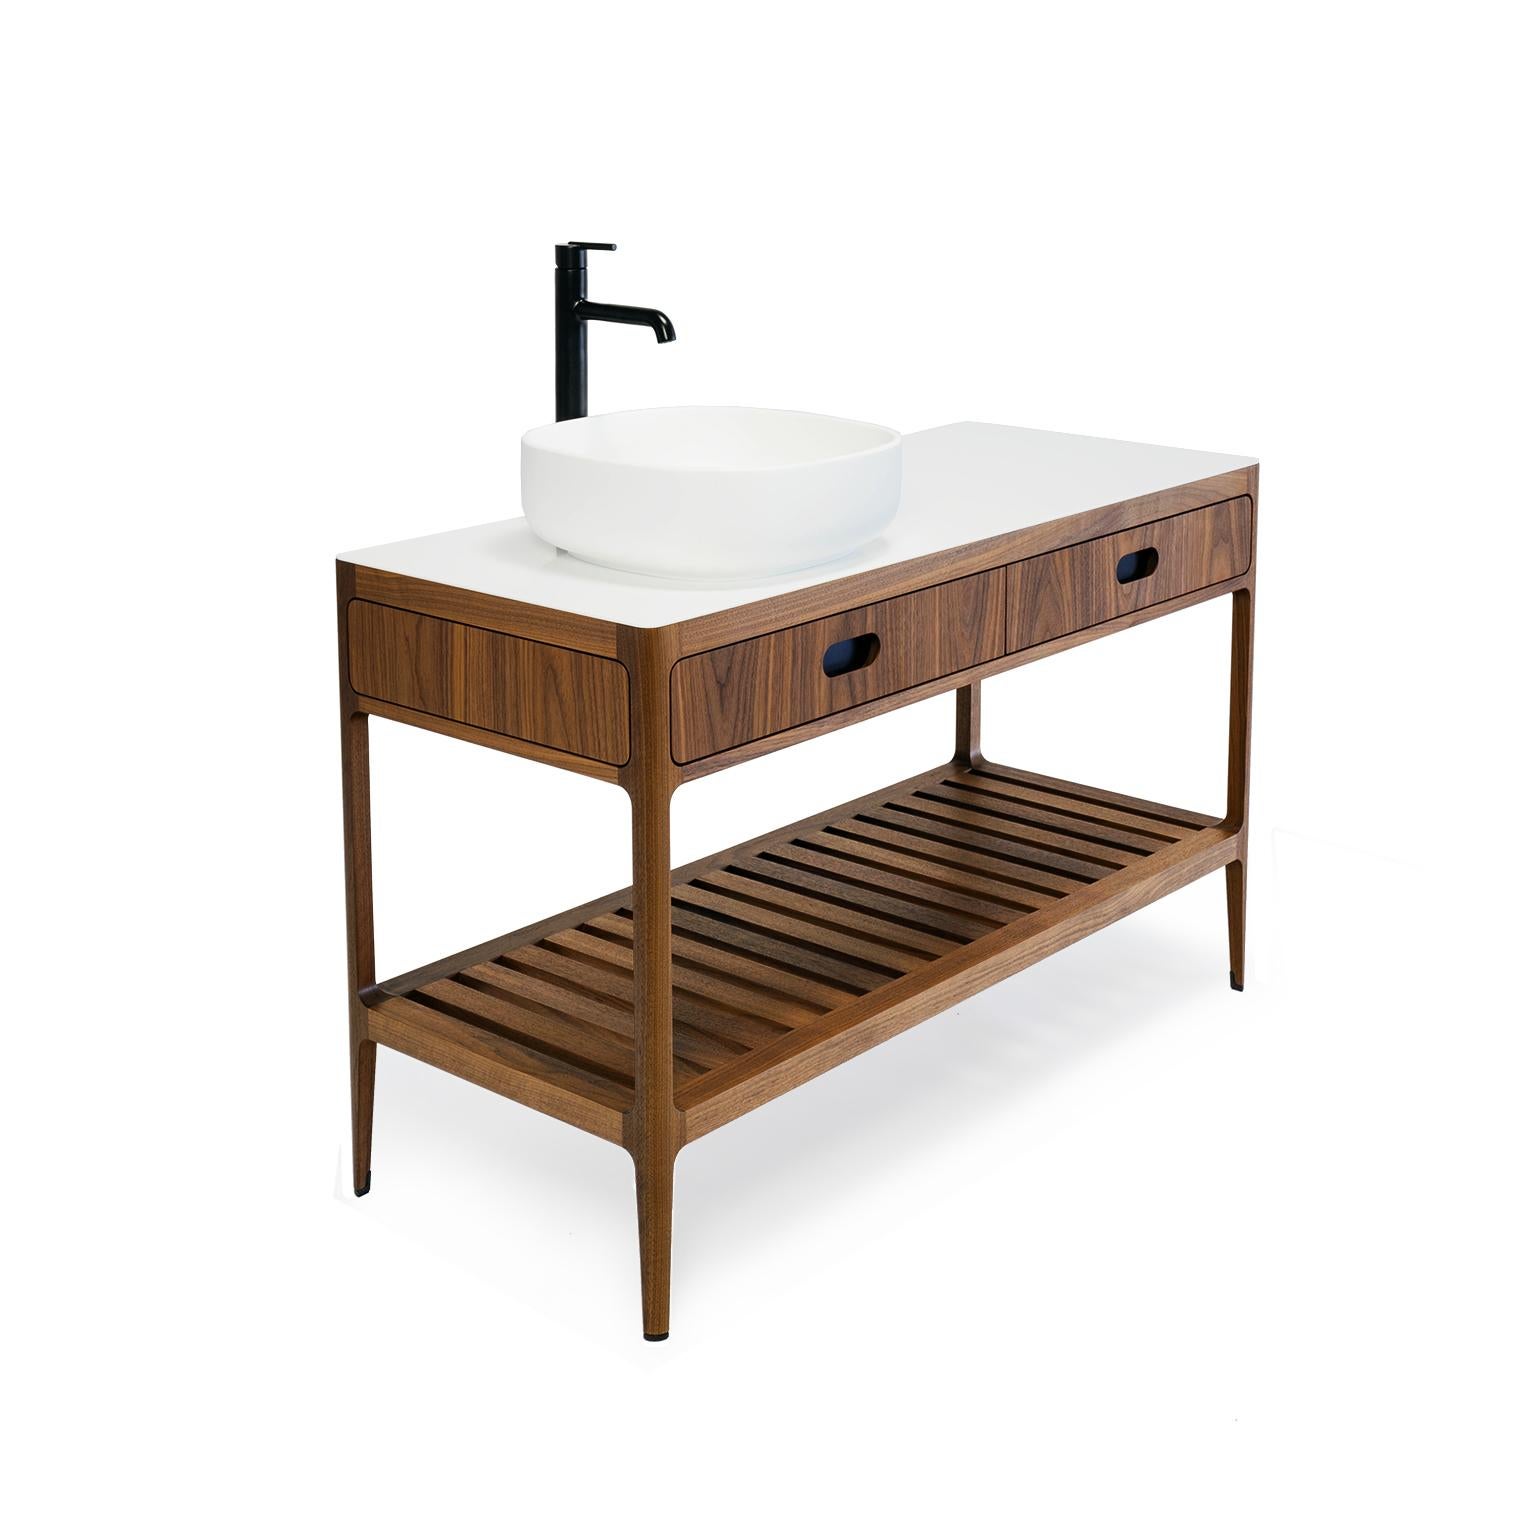 This freestanding bathroom vanity designed and fabricated by Munson Furniture draws inspiration from midcentury designs and fits beautifully with both traditional and contemporary interiors. The dimensions and functionality can all be customized to